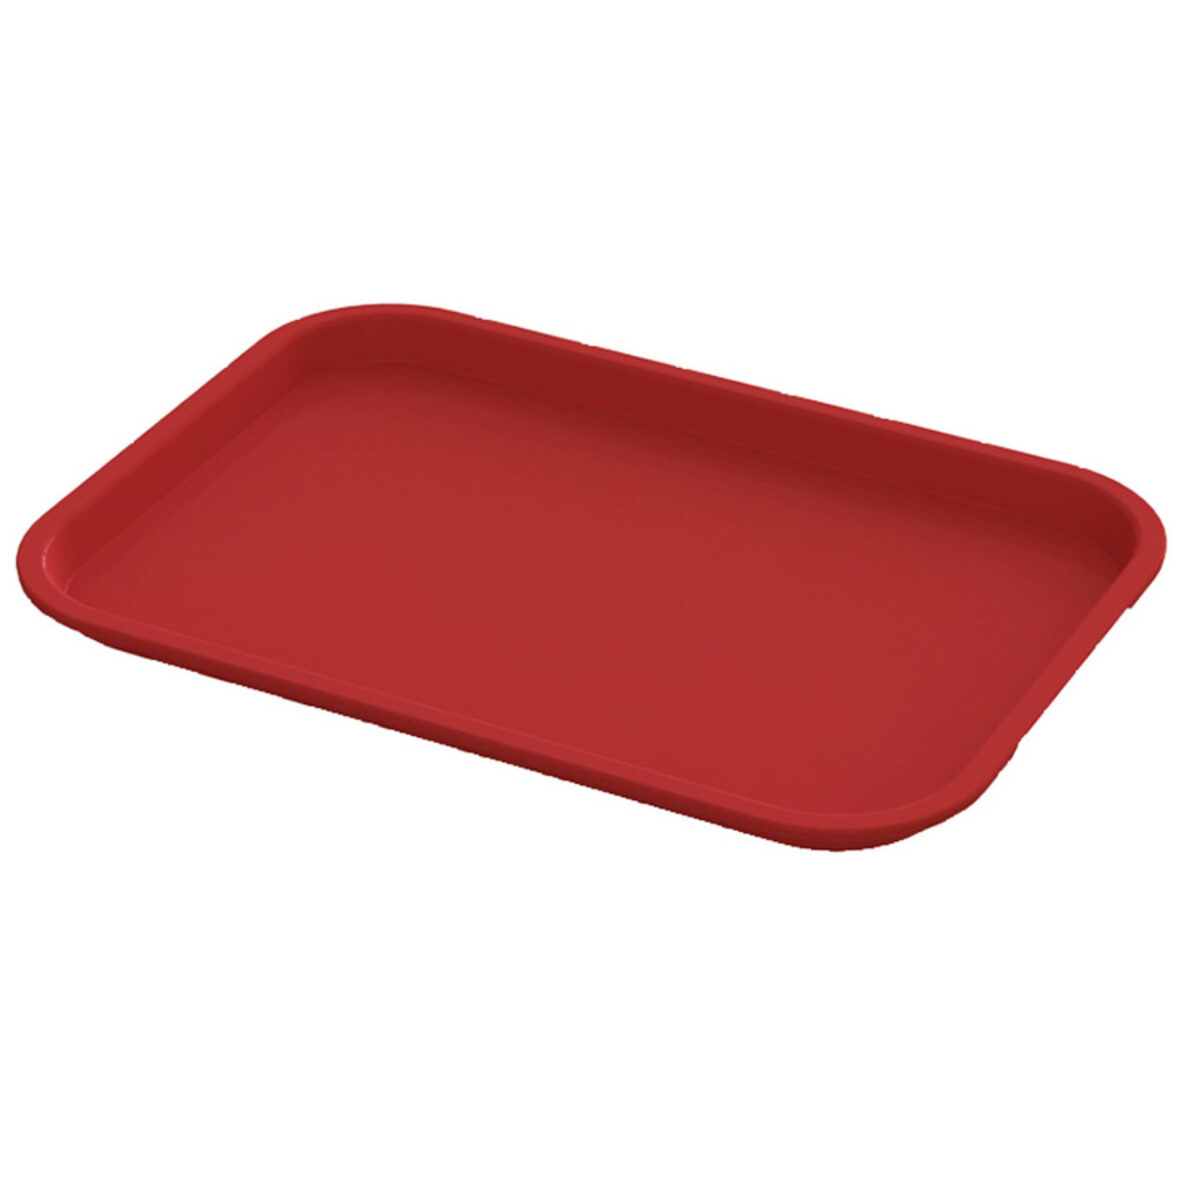 Serving Platter Round Plastic Divided Serving Tray with Lid 4/5